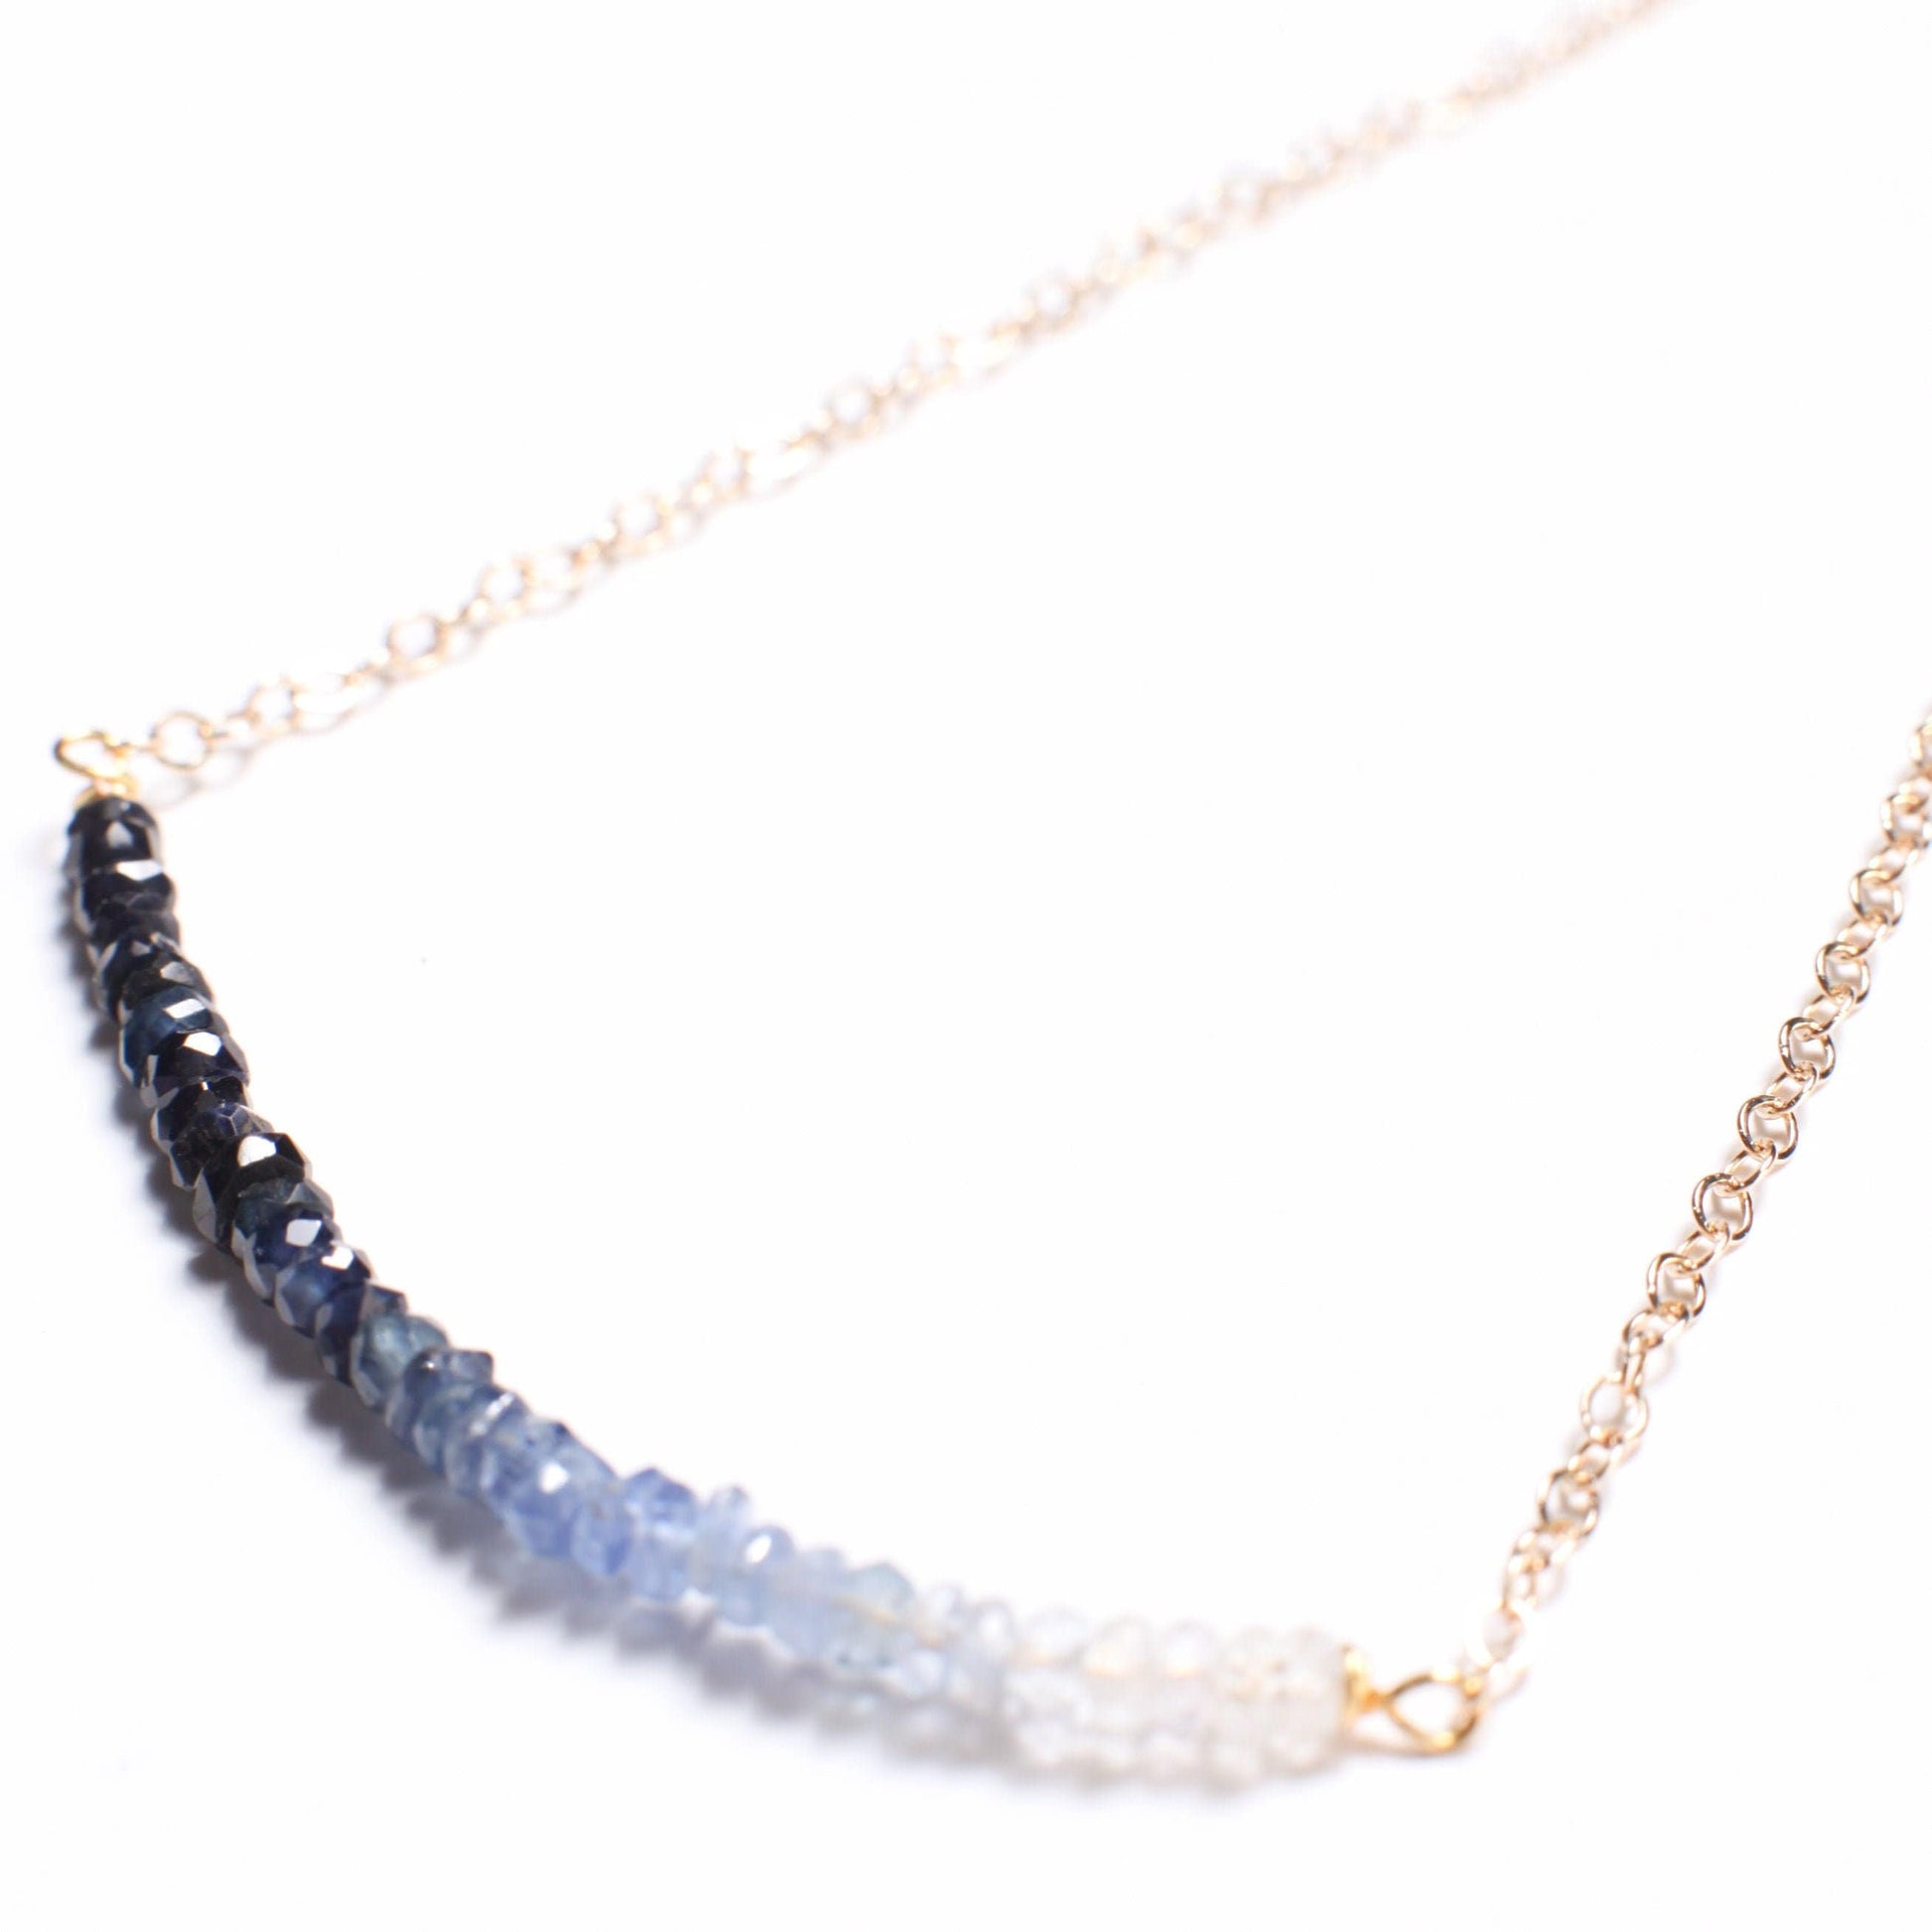 Genuine Ombre Sapphire AAA Faceted 3mm Roundel in 14K Gold Filled or 925 Sterling Silver Bar Necklace, Gift For her, September Birthstone